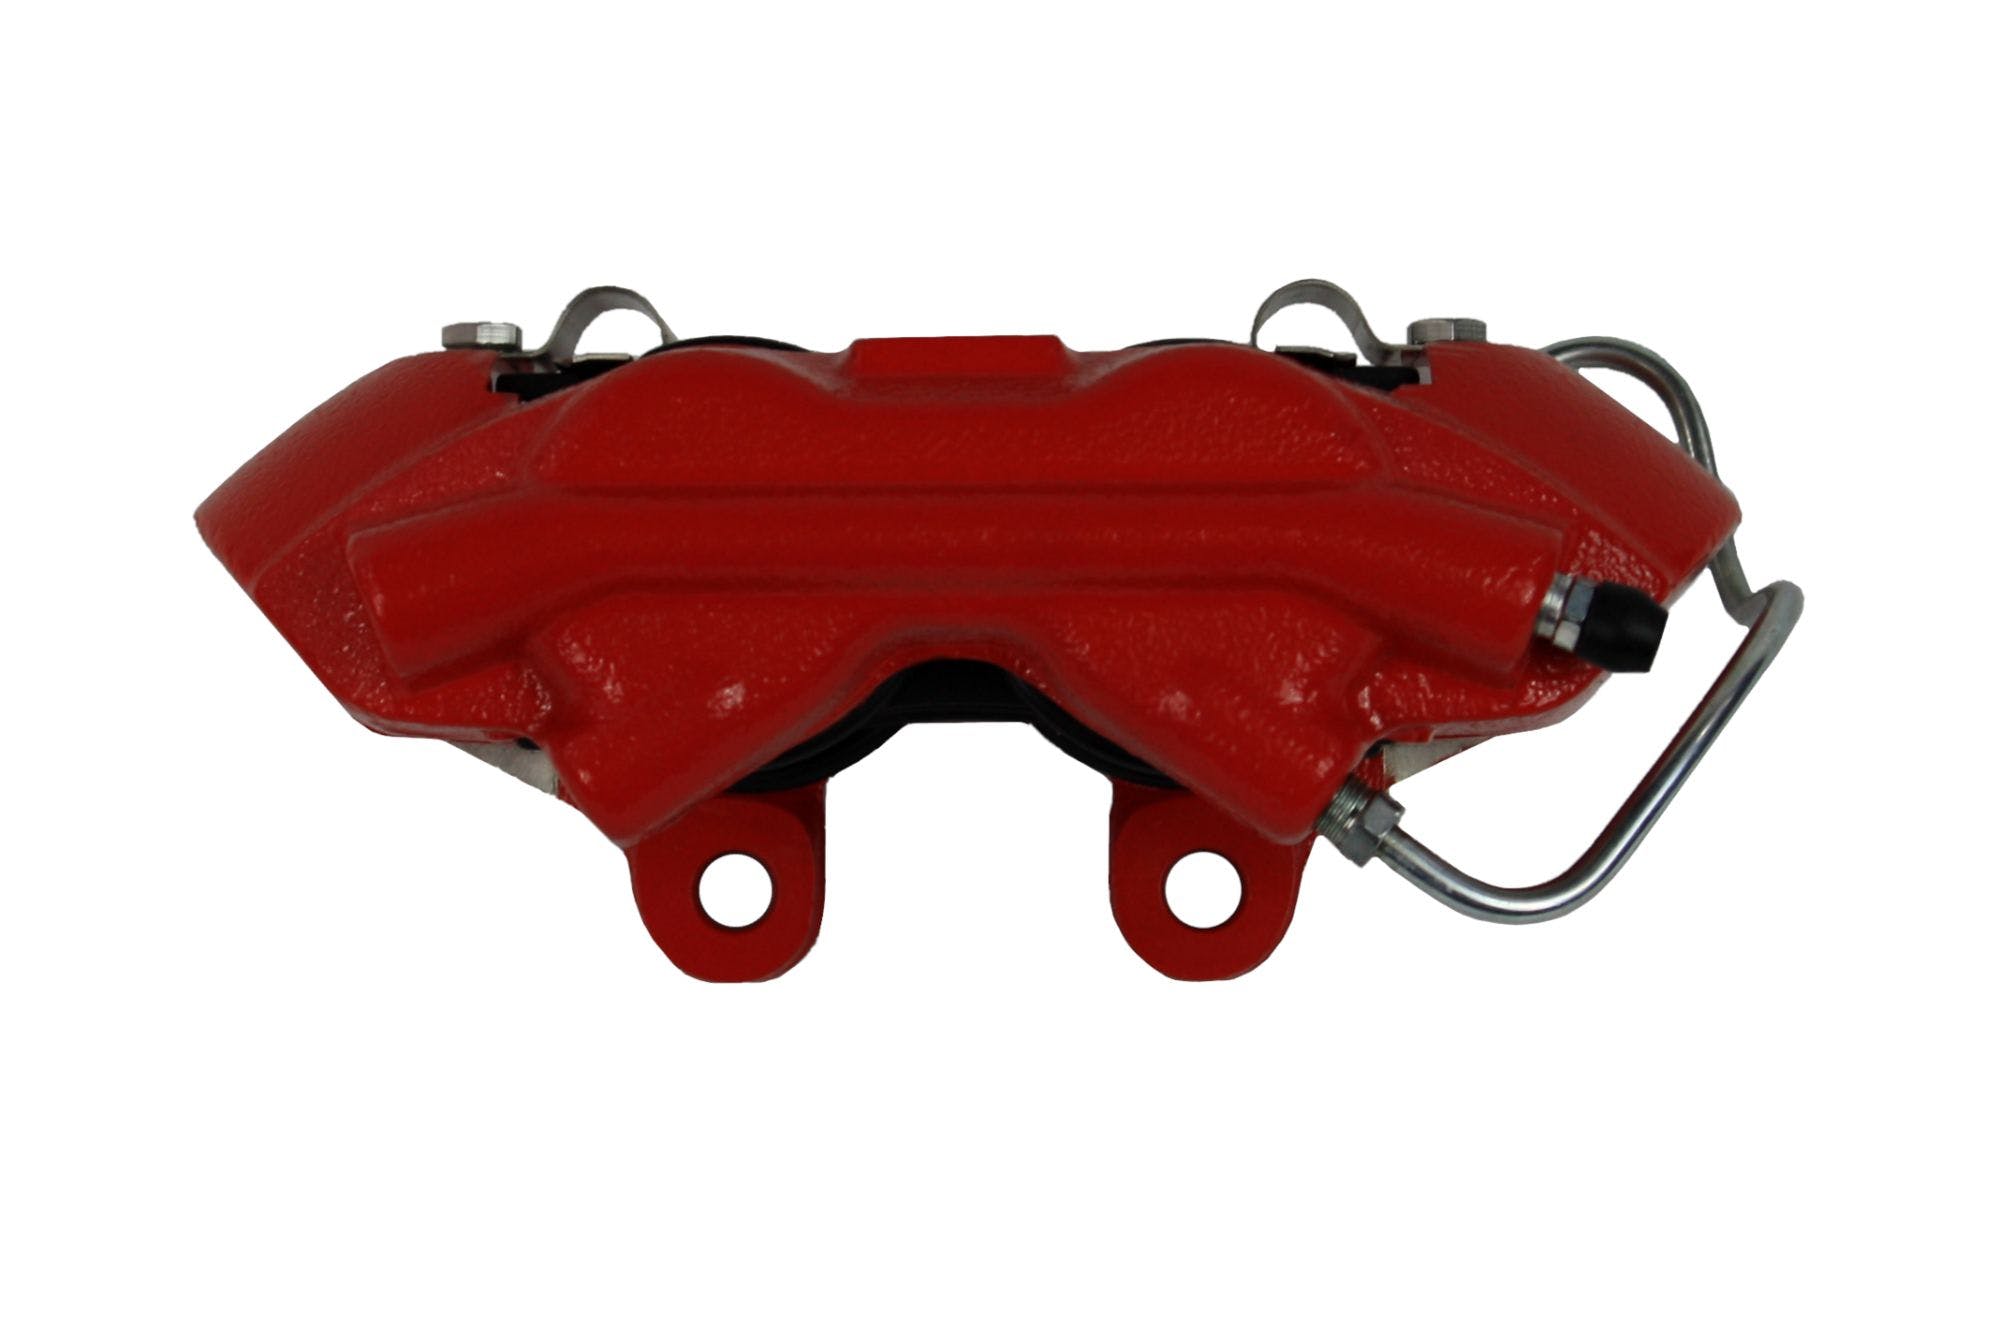 LEED Brakes RFC2001SMX Mopar A Body MaxGrip XDS Conversion Kit - Spindle Mount - Red Powder Coat